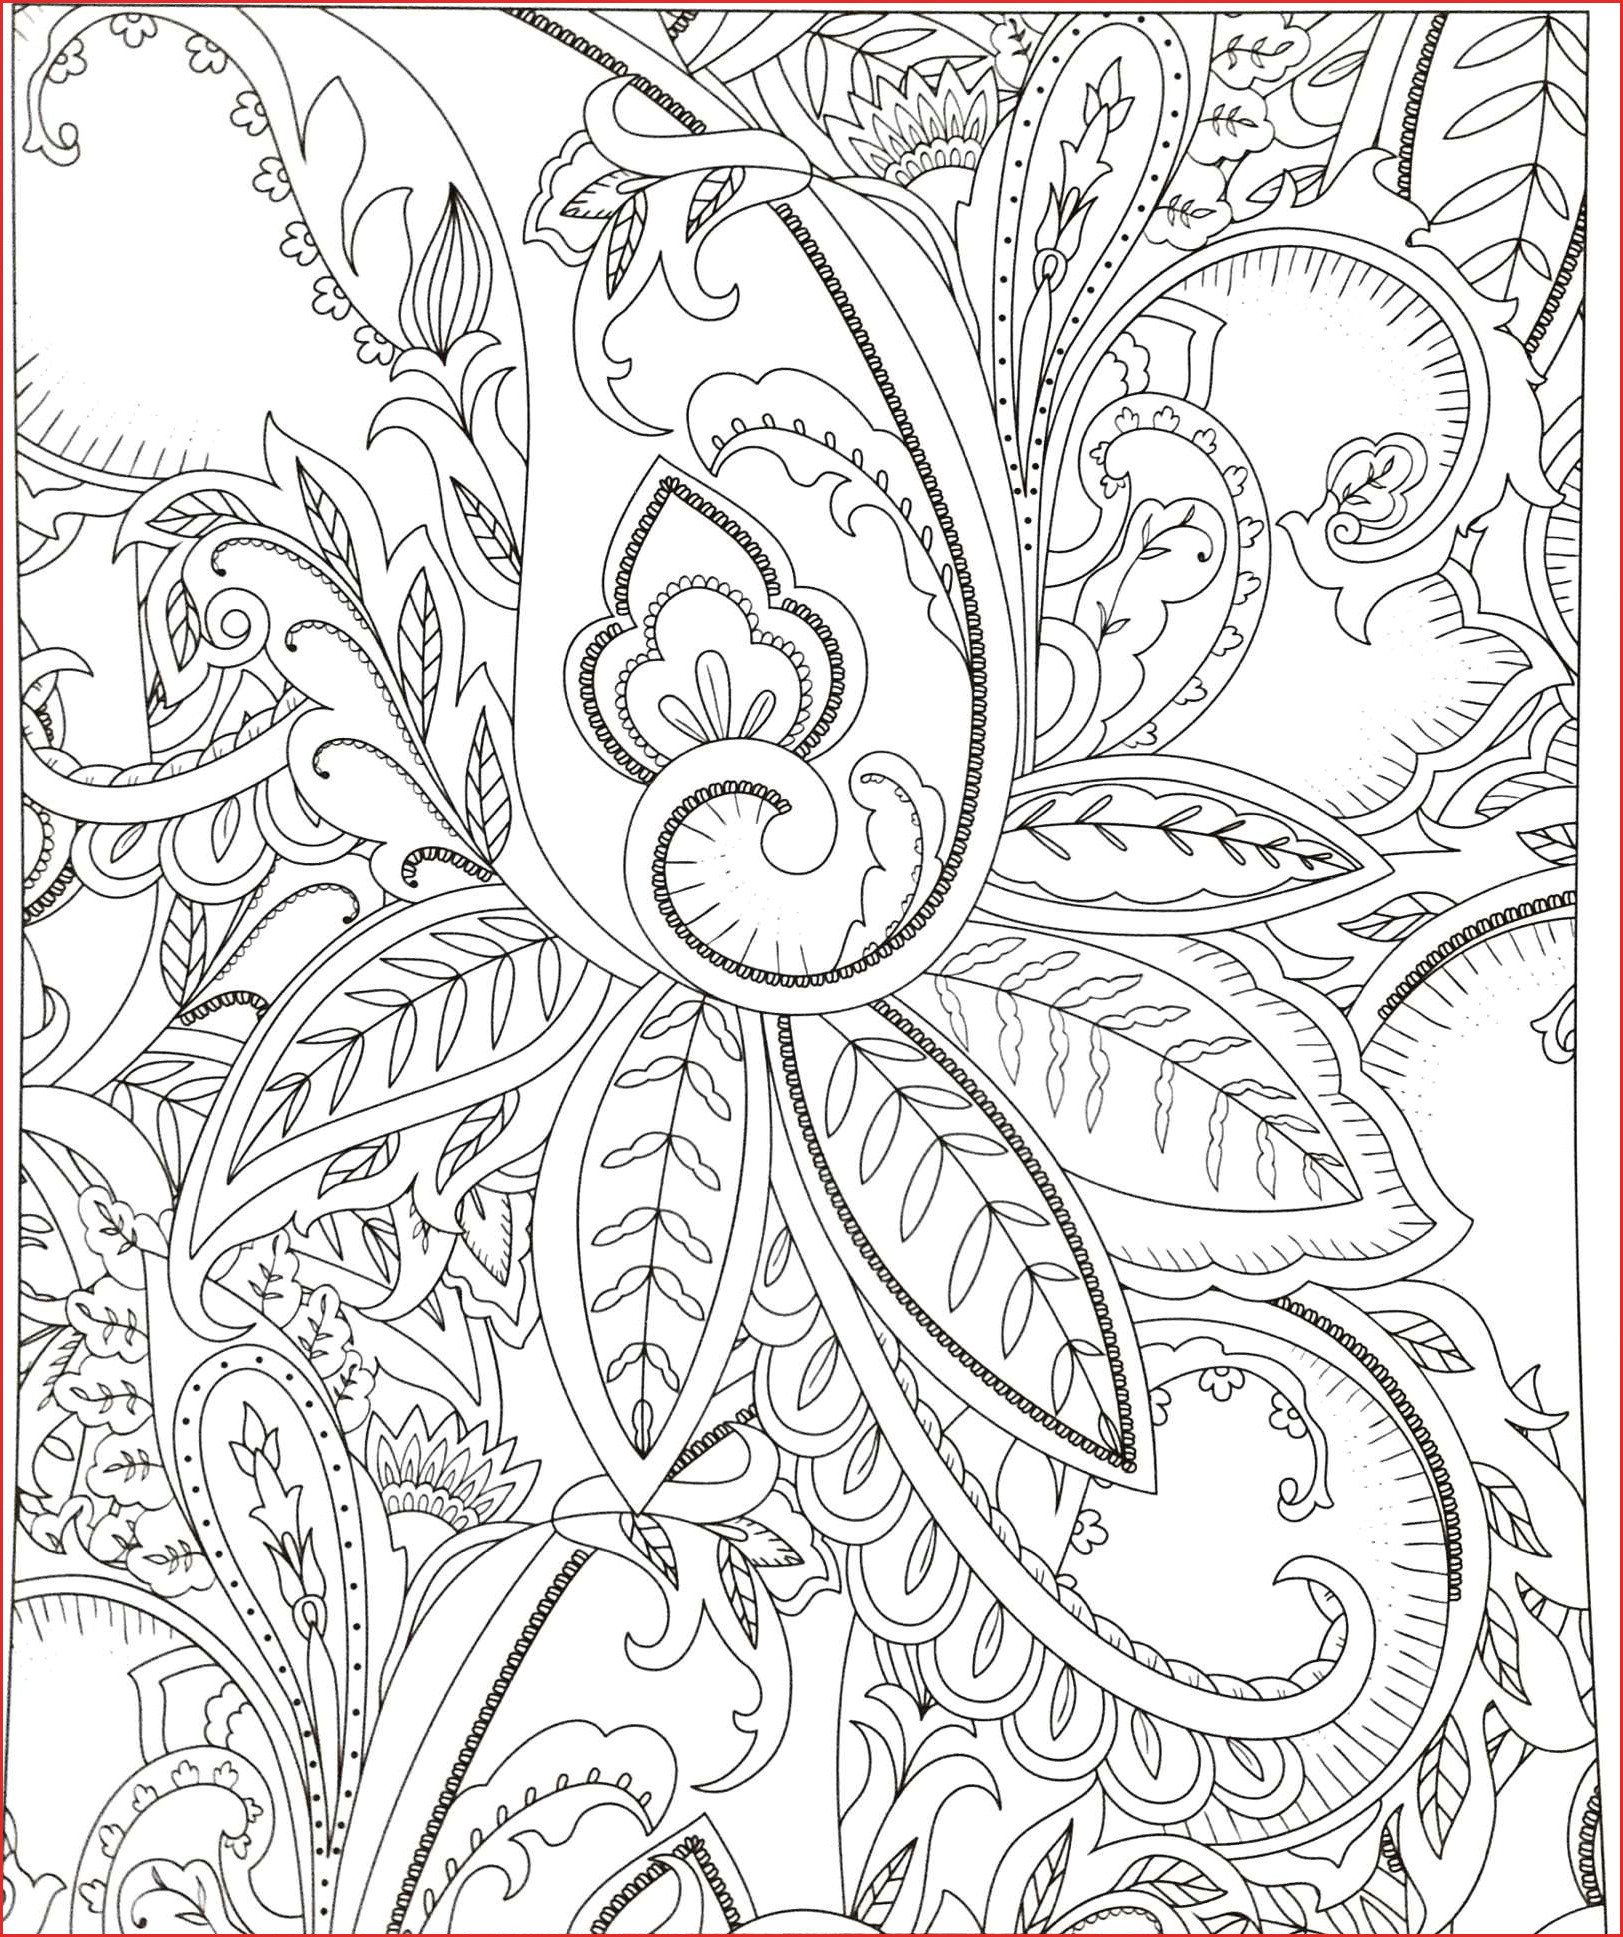 realistic animal coloring page unique stock pain drawing easy to draw instruments home coloring pages best of realistic animal coloring page jpg